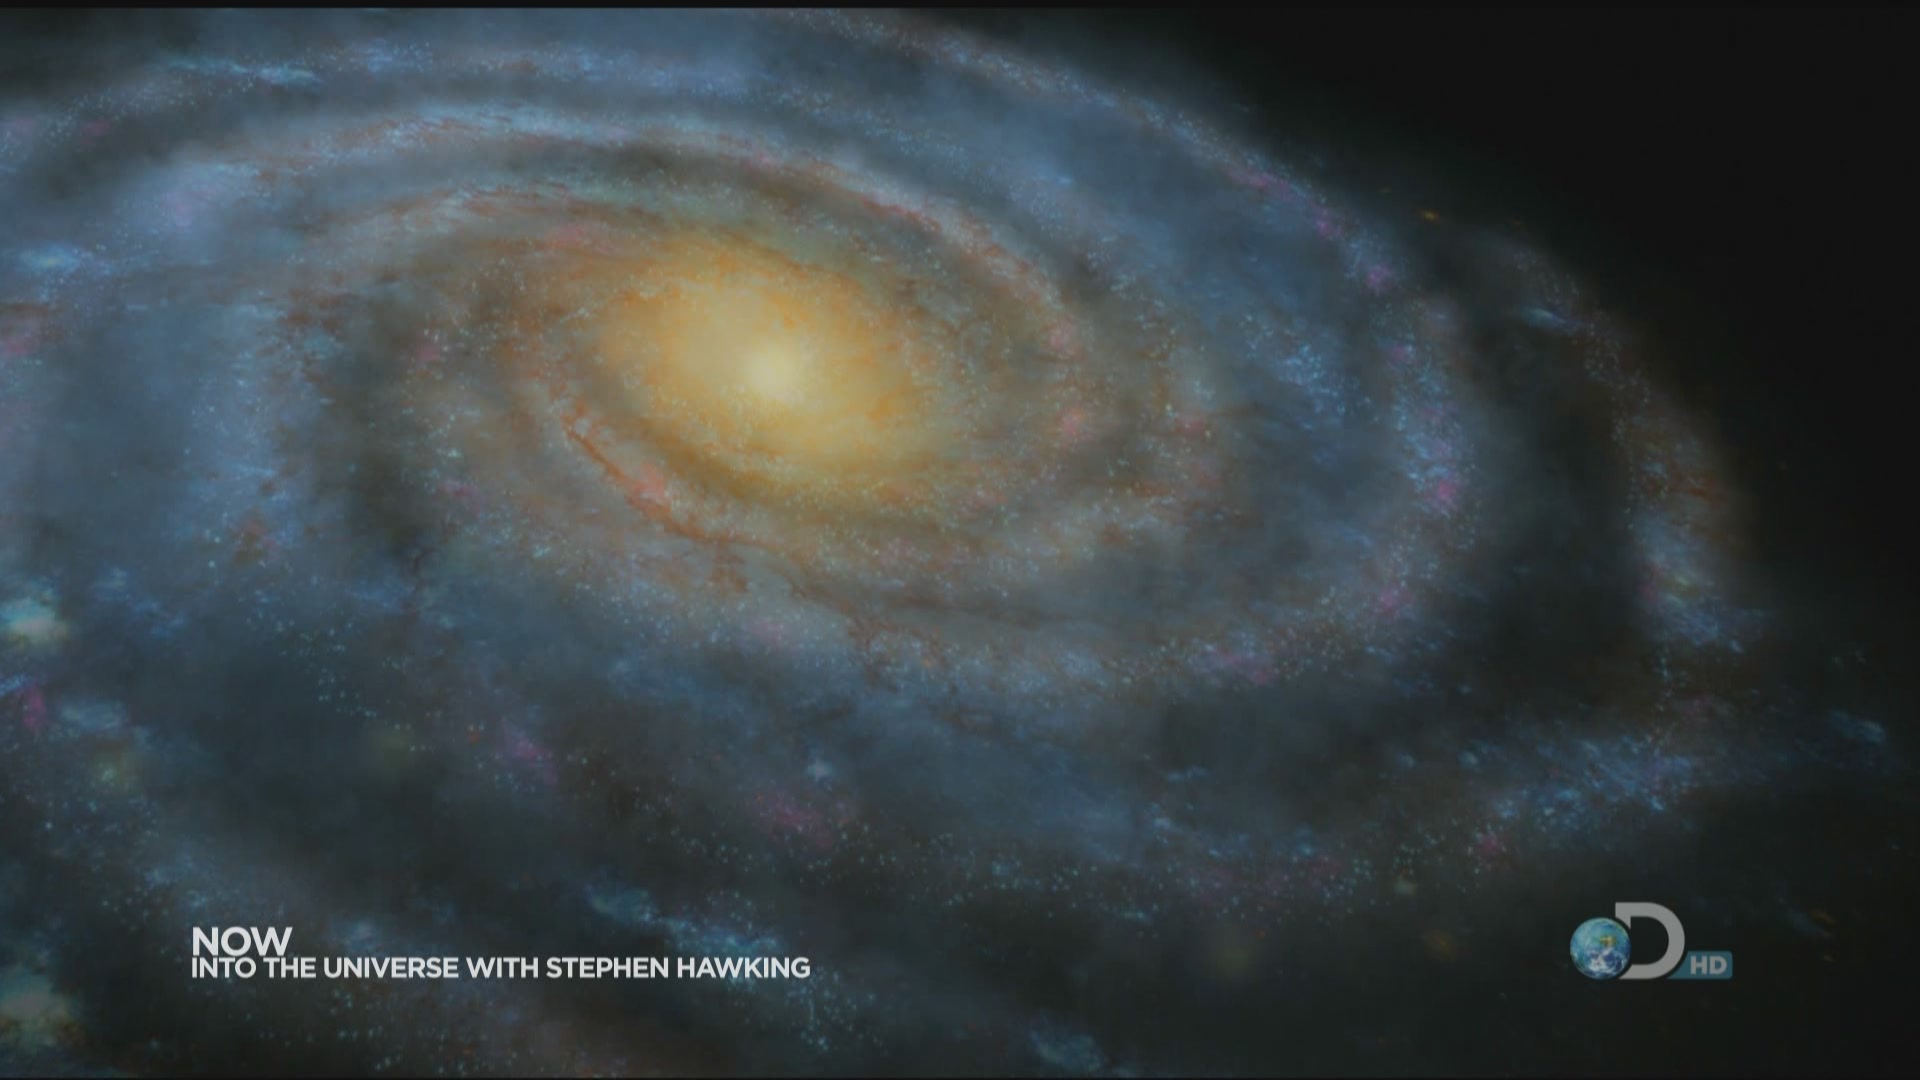 Into the Universe With Stephen Hawking S01E03 The Story of Everything05.JPG